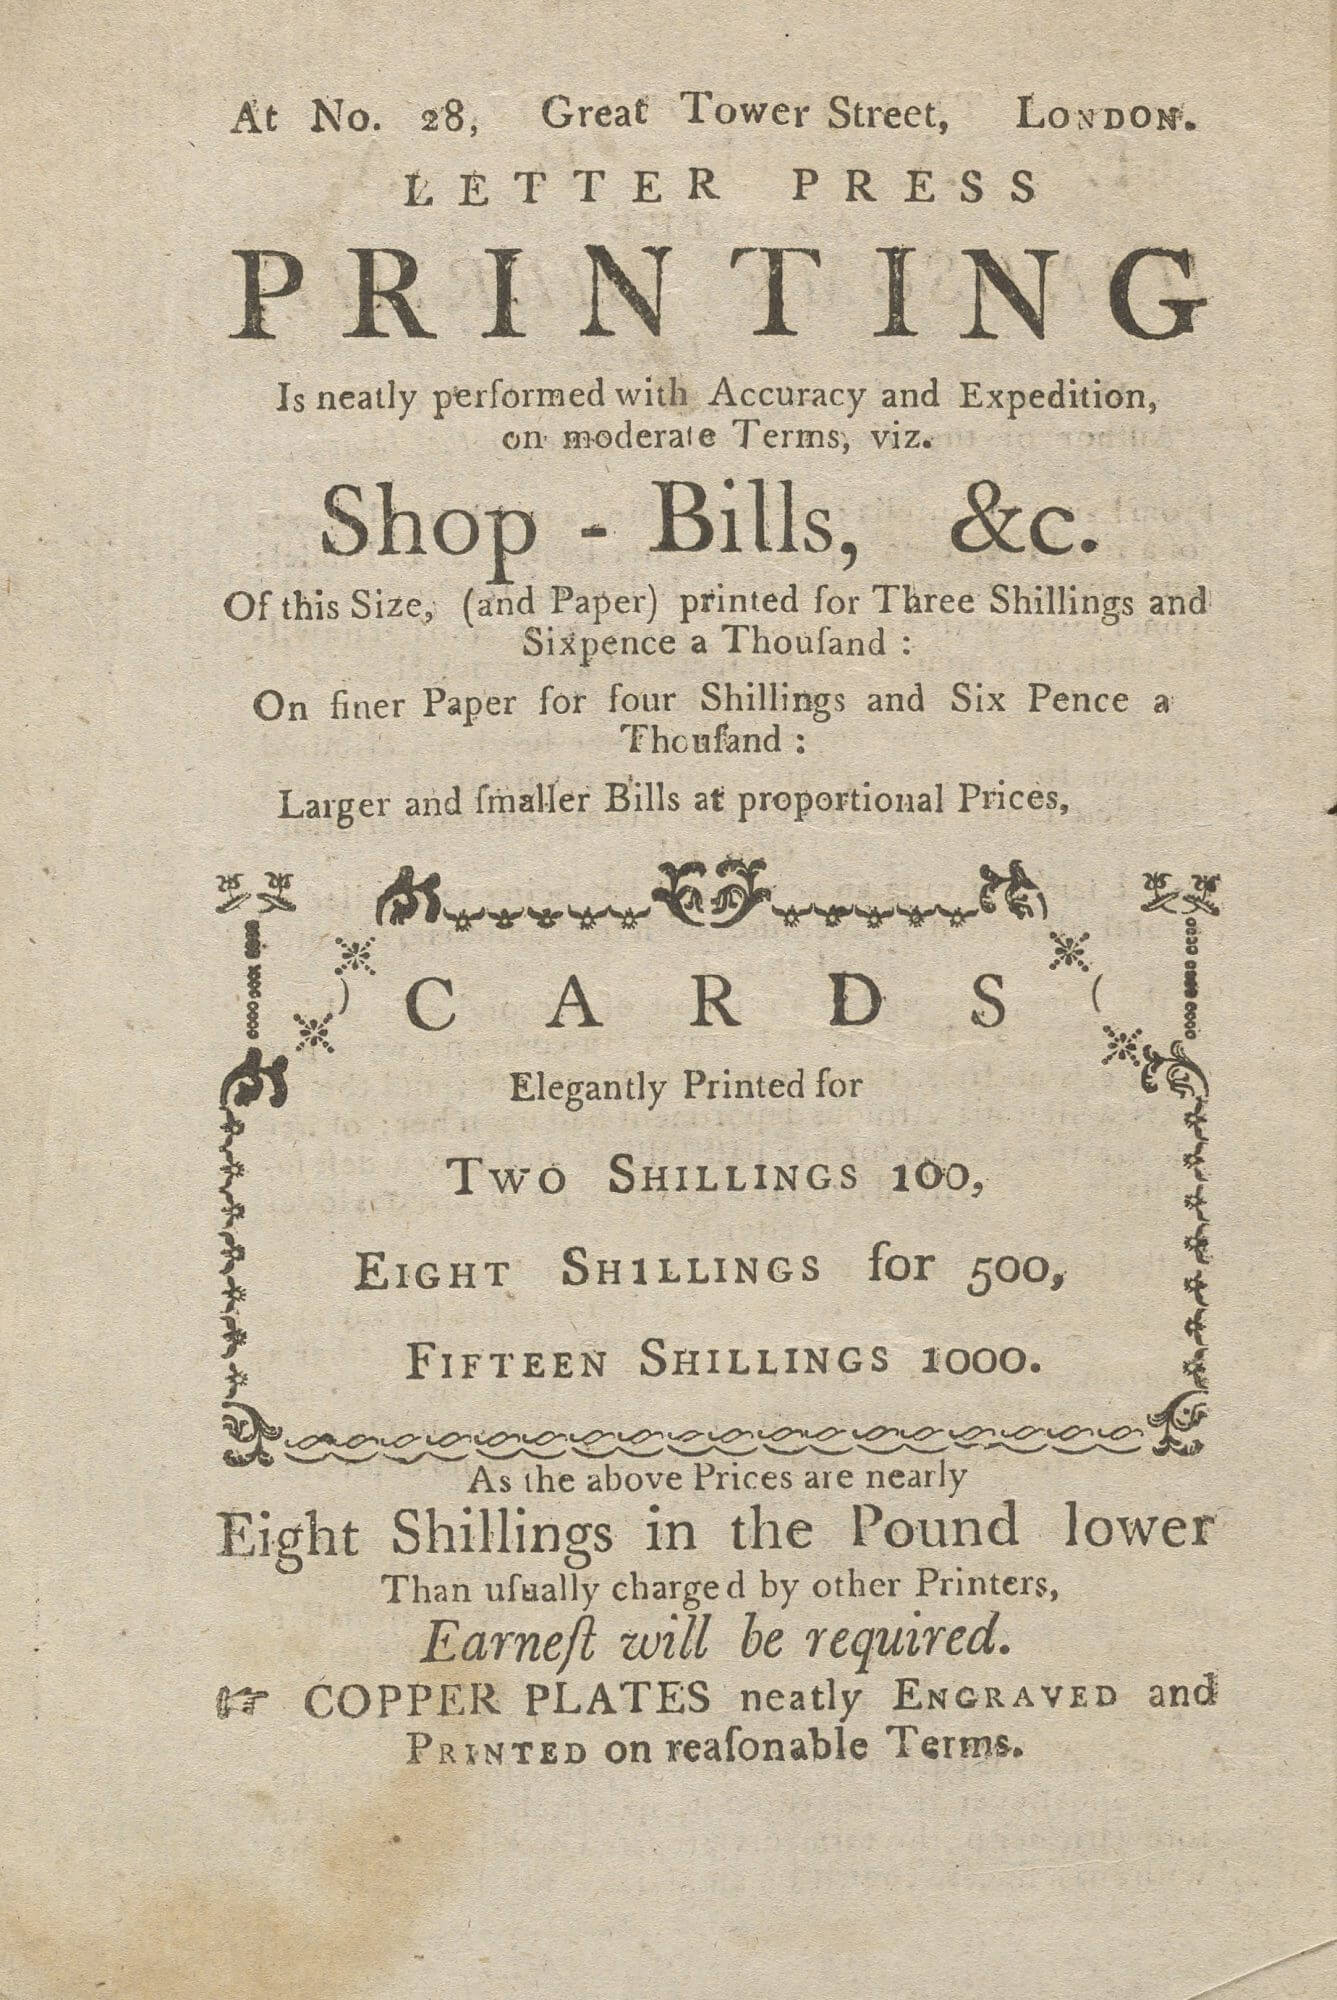 This ad selling letterpress printing to the public appears on the back of a title page; the book lacks an imprint statement, and the shop location given here allows researchers to suggest a time-frame for the book's publication.